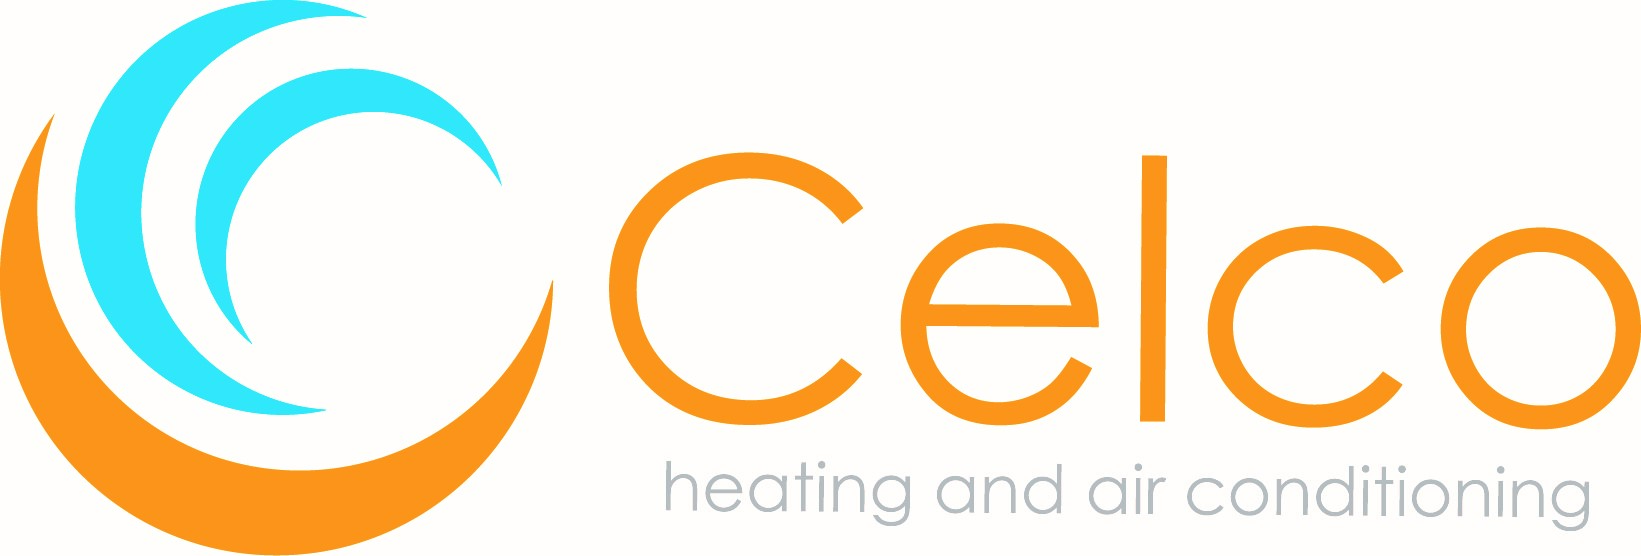 Celco Heating & Air Conditioning Logo